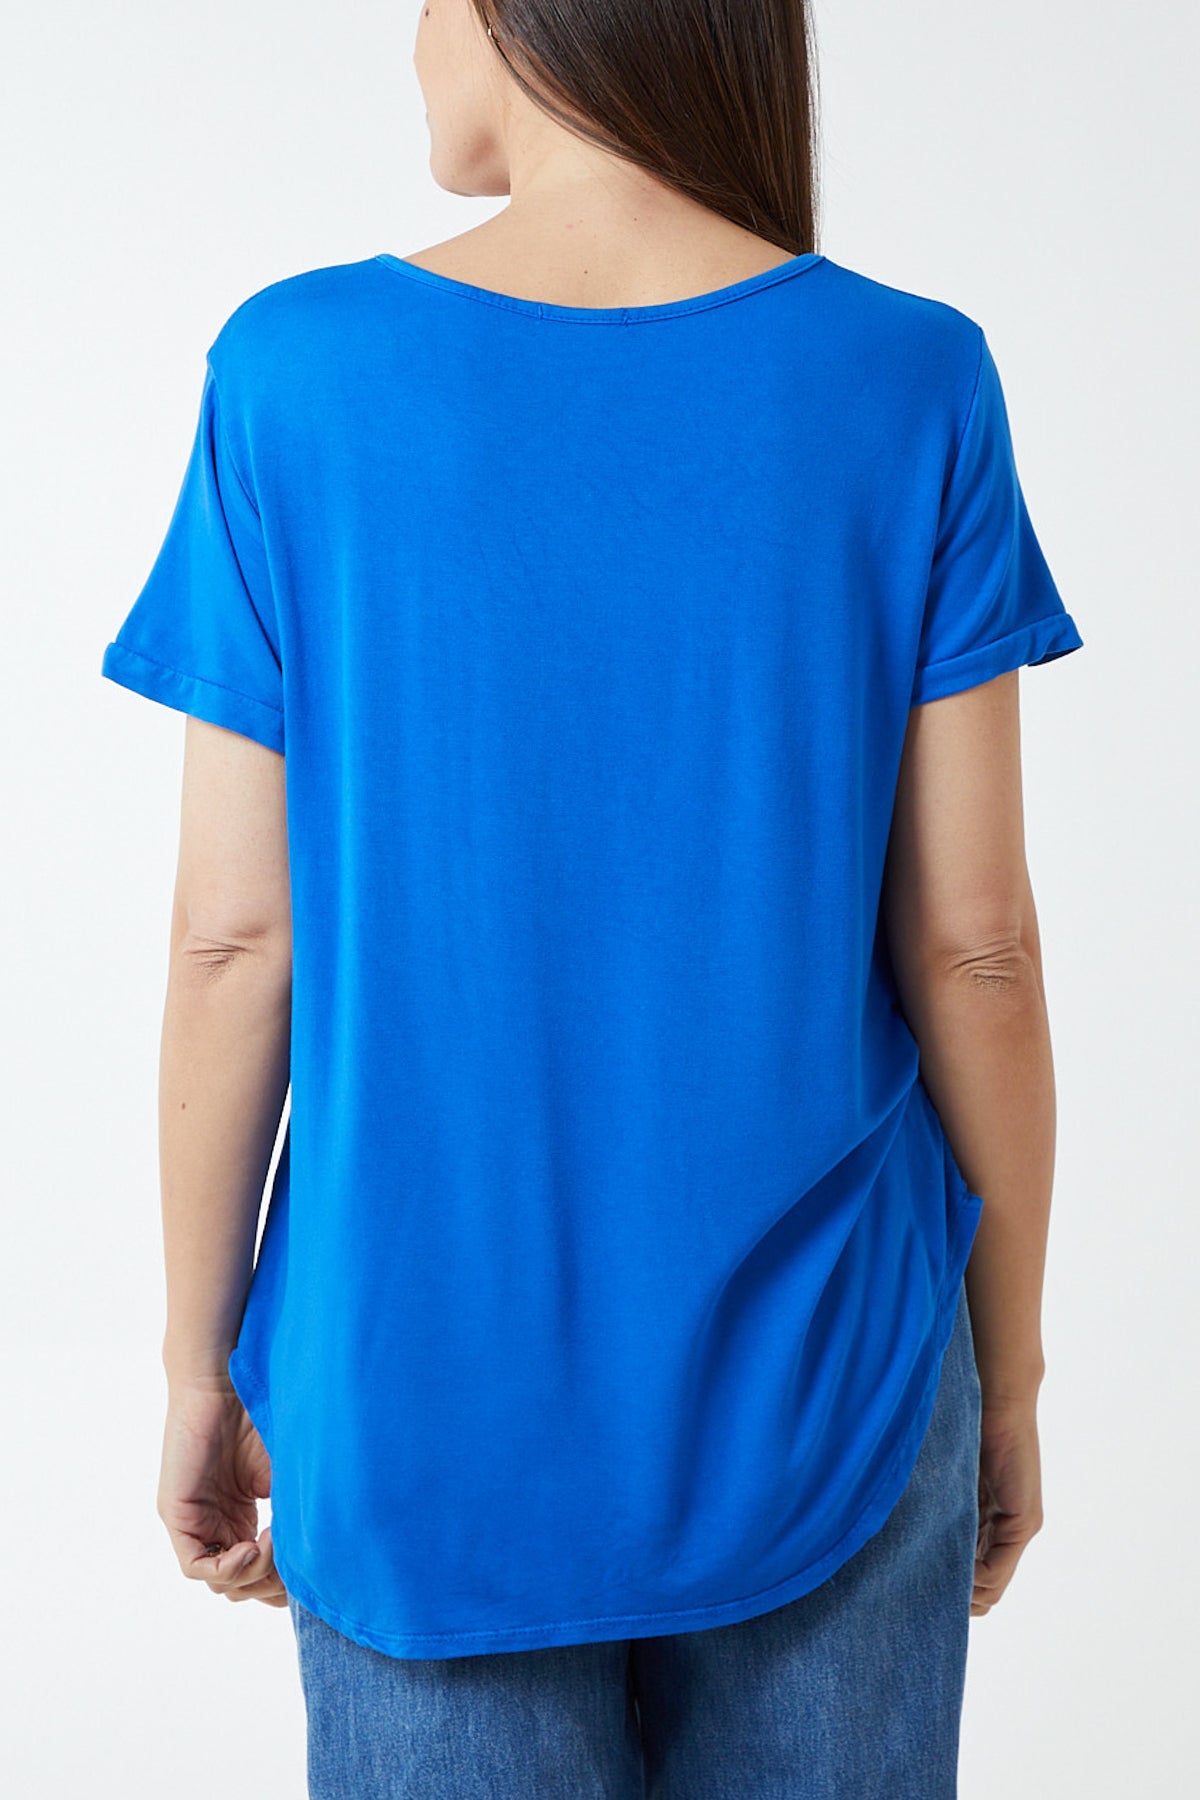 French Terry Super Soft Basic T-Shirt